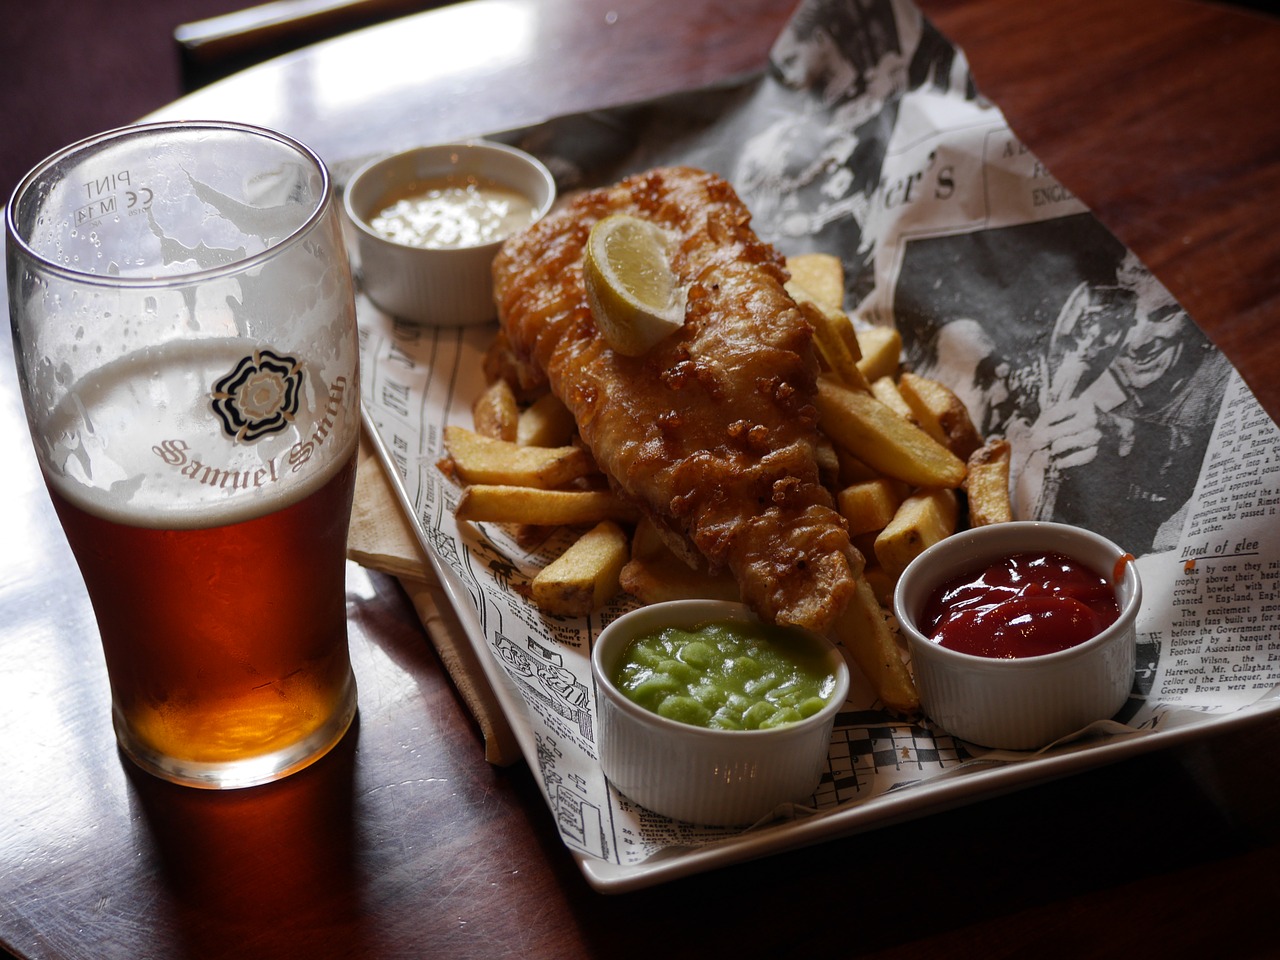 Pair a seasonal beer with classic fish and chips for a comforting, hearty meal